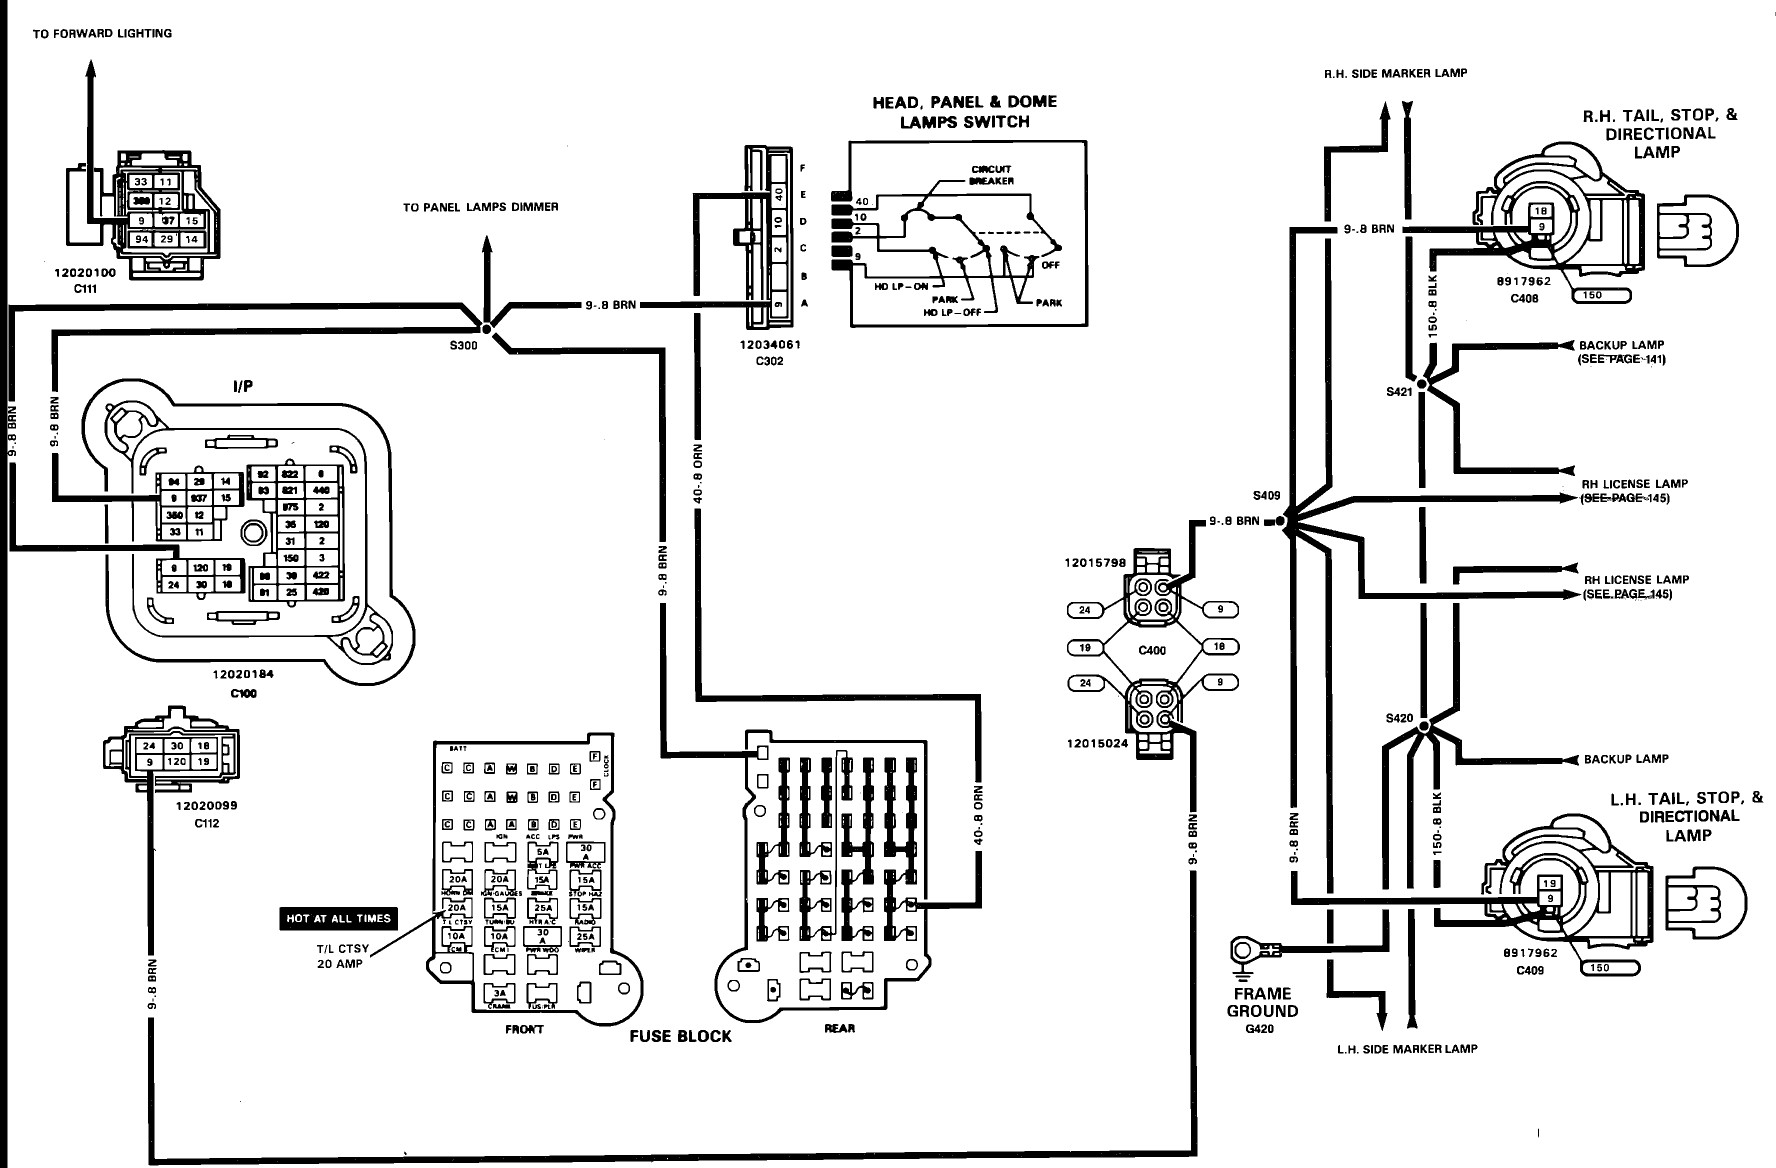 Wiring Diagram for 2001 Chevy S10 4.3 Engine Diagram] 2003 S10 Tail Light Wiring Diagram Full Version Hd Of Wiring Diagram for 2001 Chevy S10 4.3 Engine